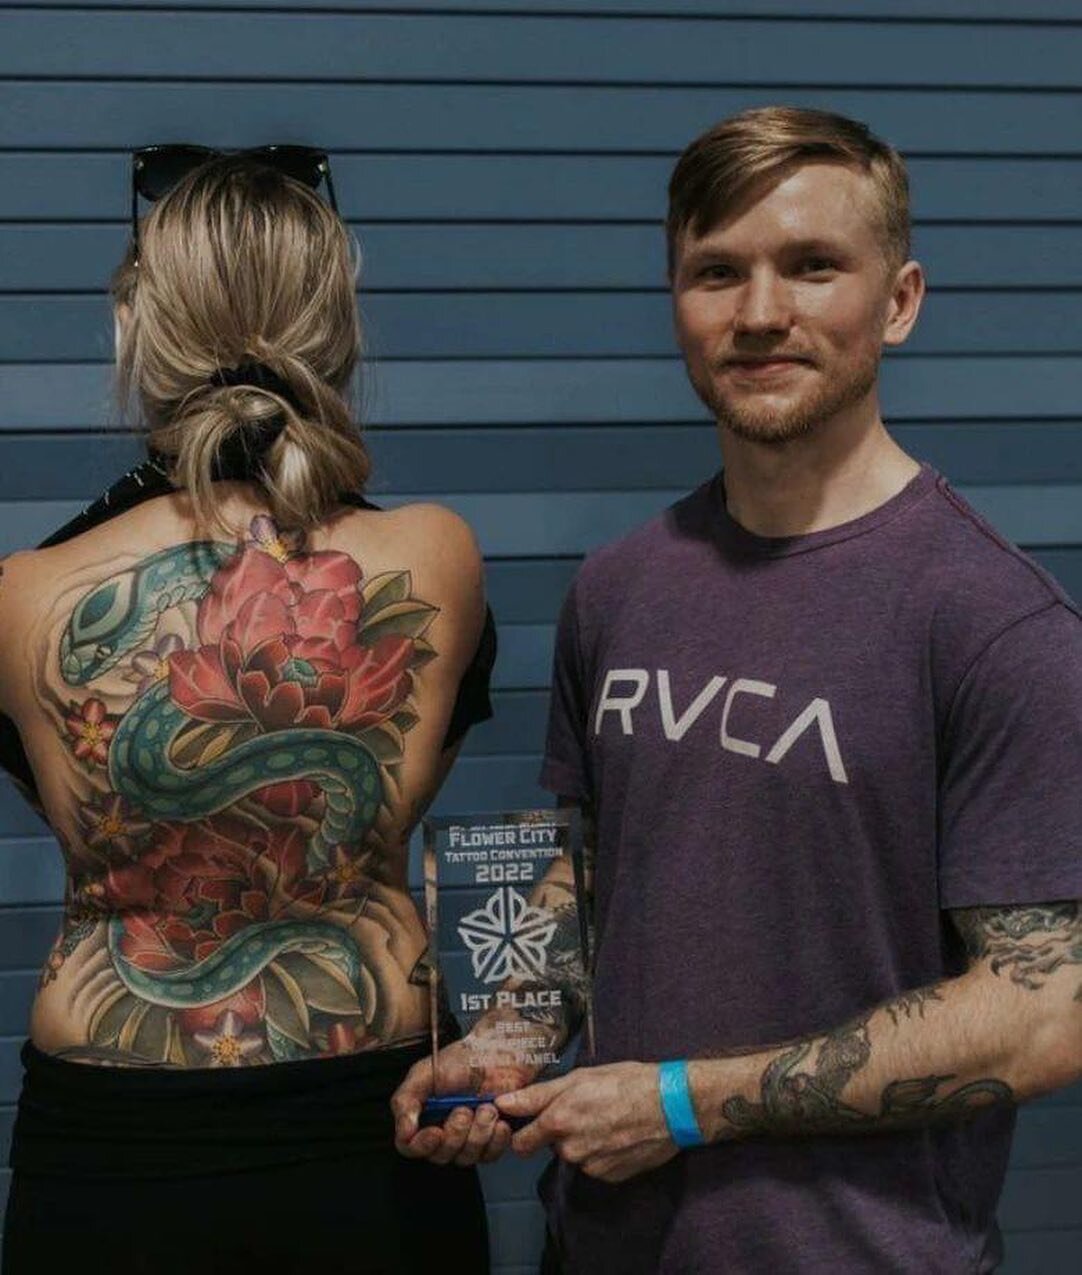 Huge shout out to our resident badass Jon Odell for taking two 1st place wins home from the Flower City Tattoo Convention this past weekend! I&rsquo;m so proud of this dudes hard work and determination. It&rsquo;s been amazing seeing him excel since 